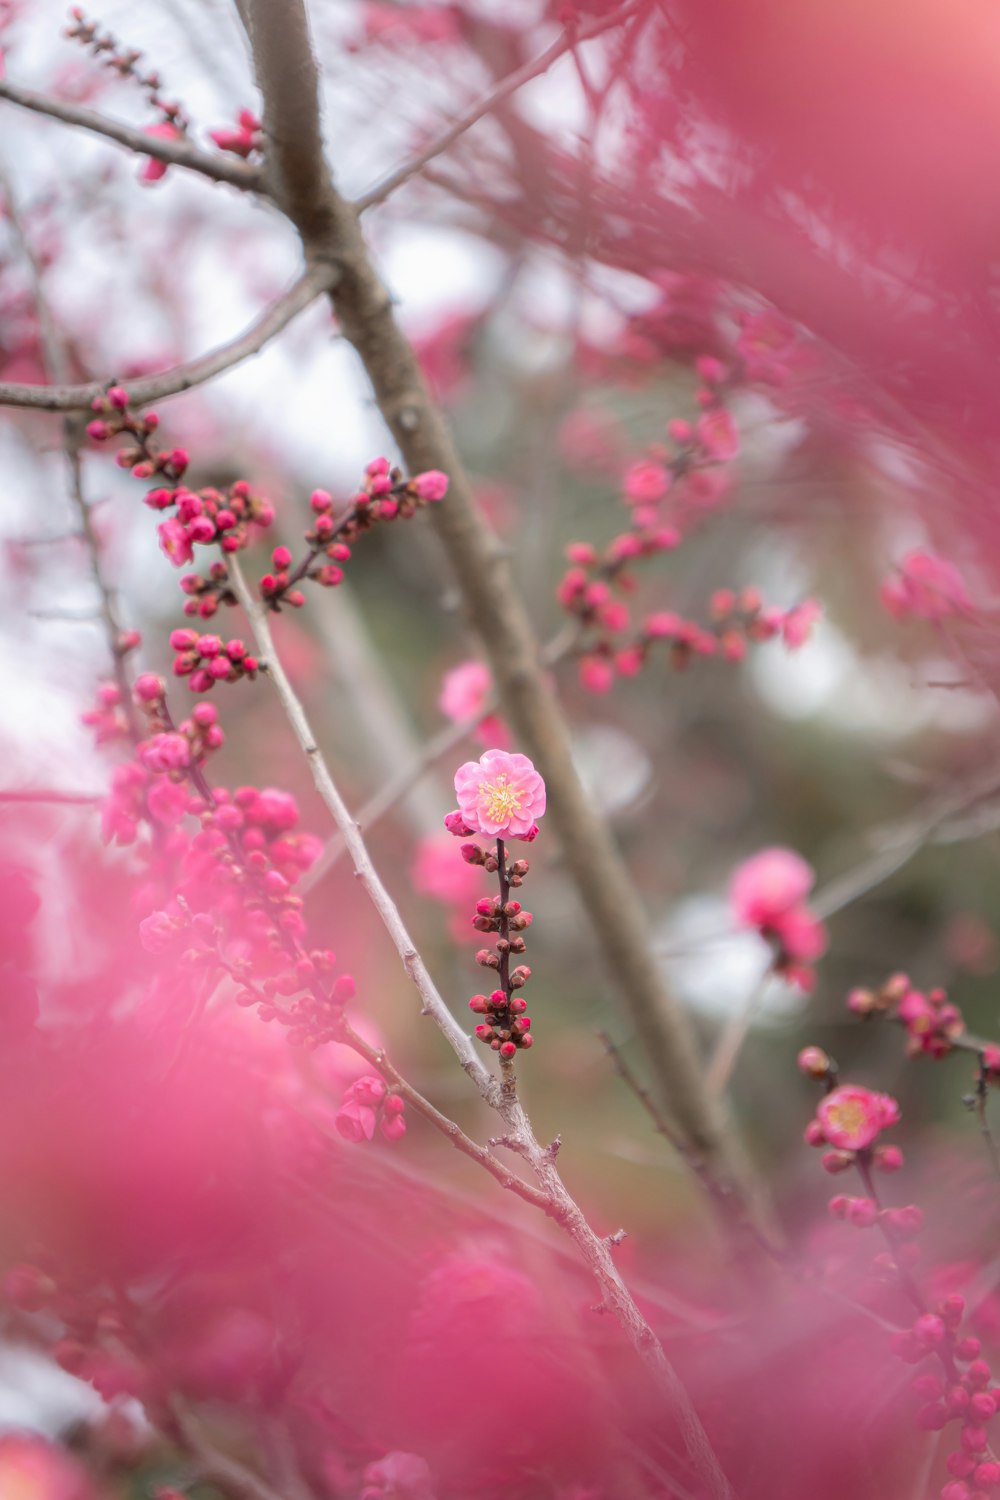 pink flowers are growing on a tree branch